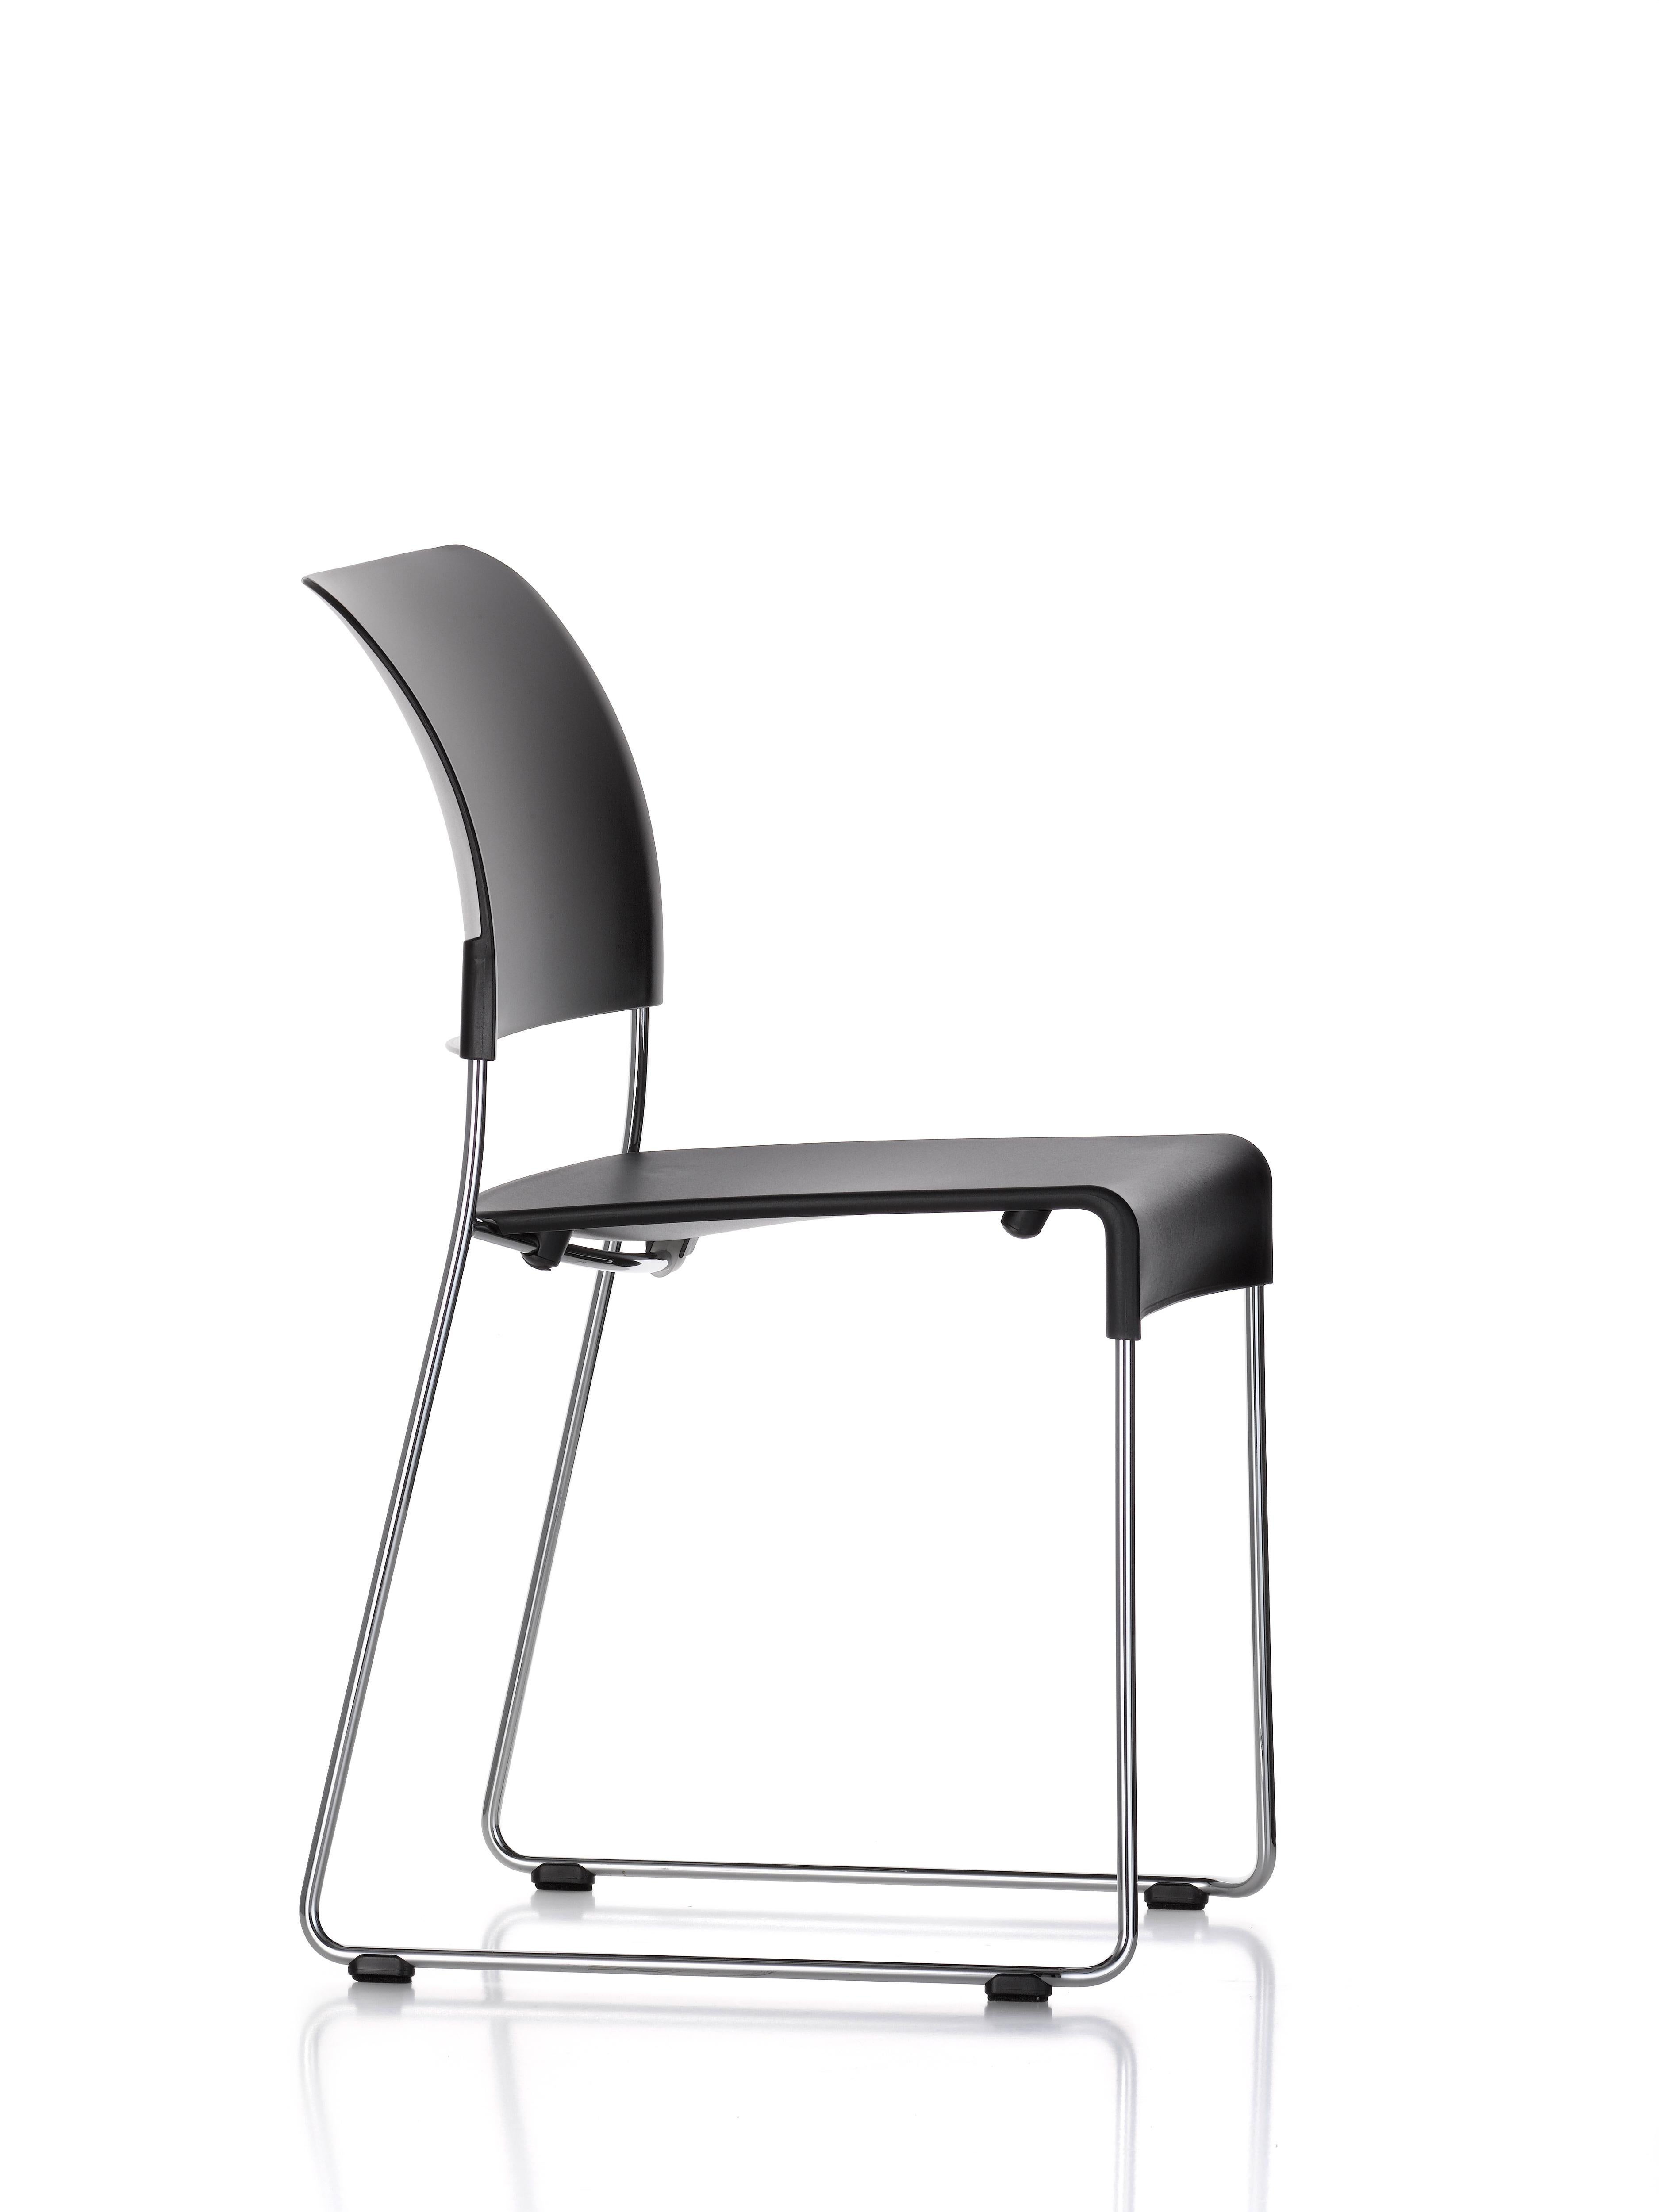 These products are only available in the United States.

With SIM, Jasper Morrison has created the perfect expression of the chair type inaugurated by David Rowland’s famed 40/4 chair in the 1960s. SIM is a successful synthesis of clear design and